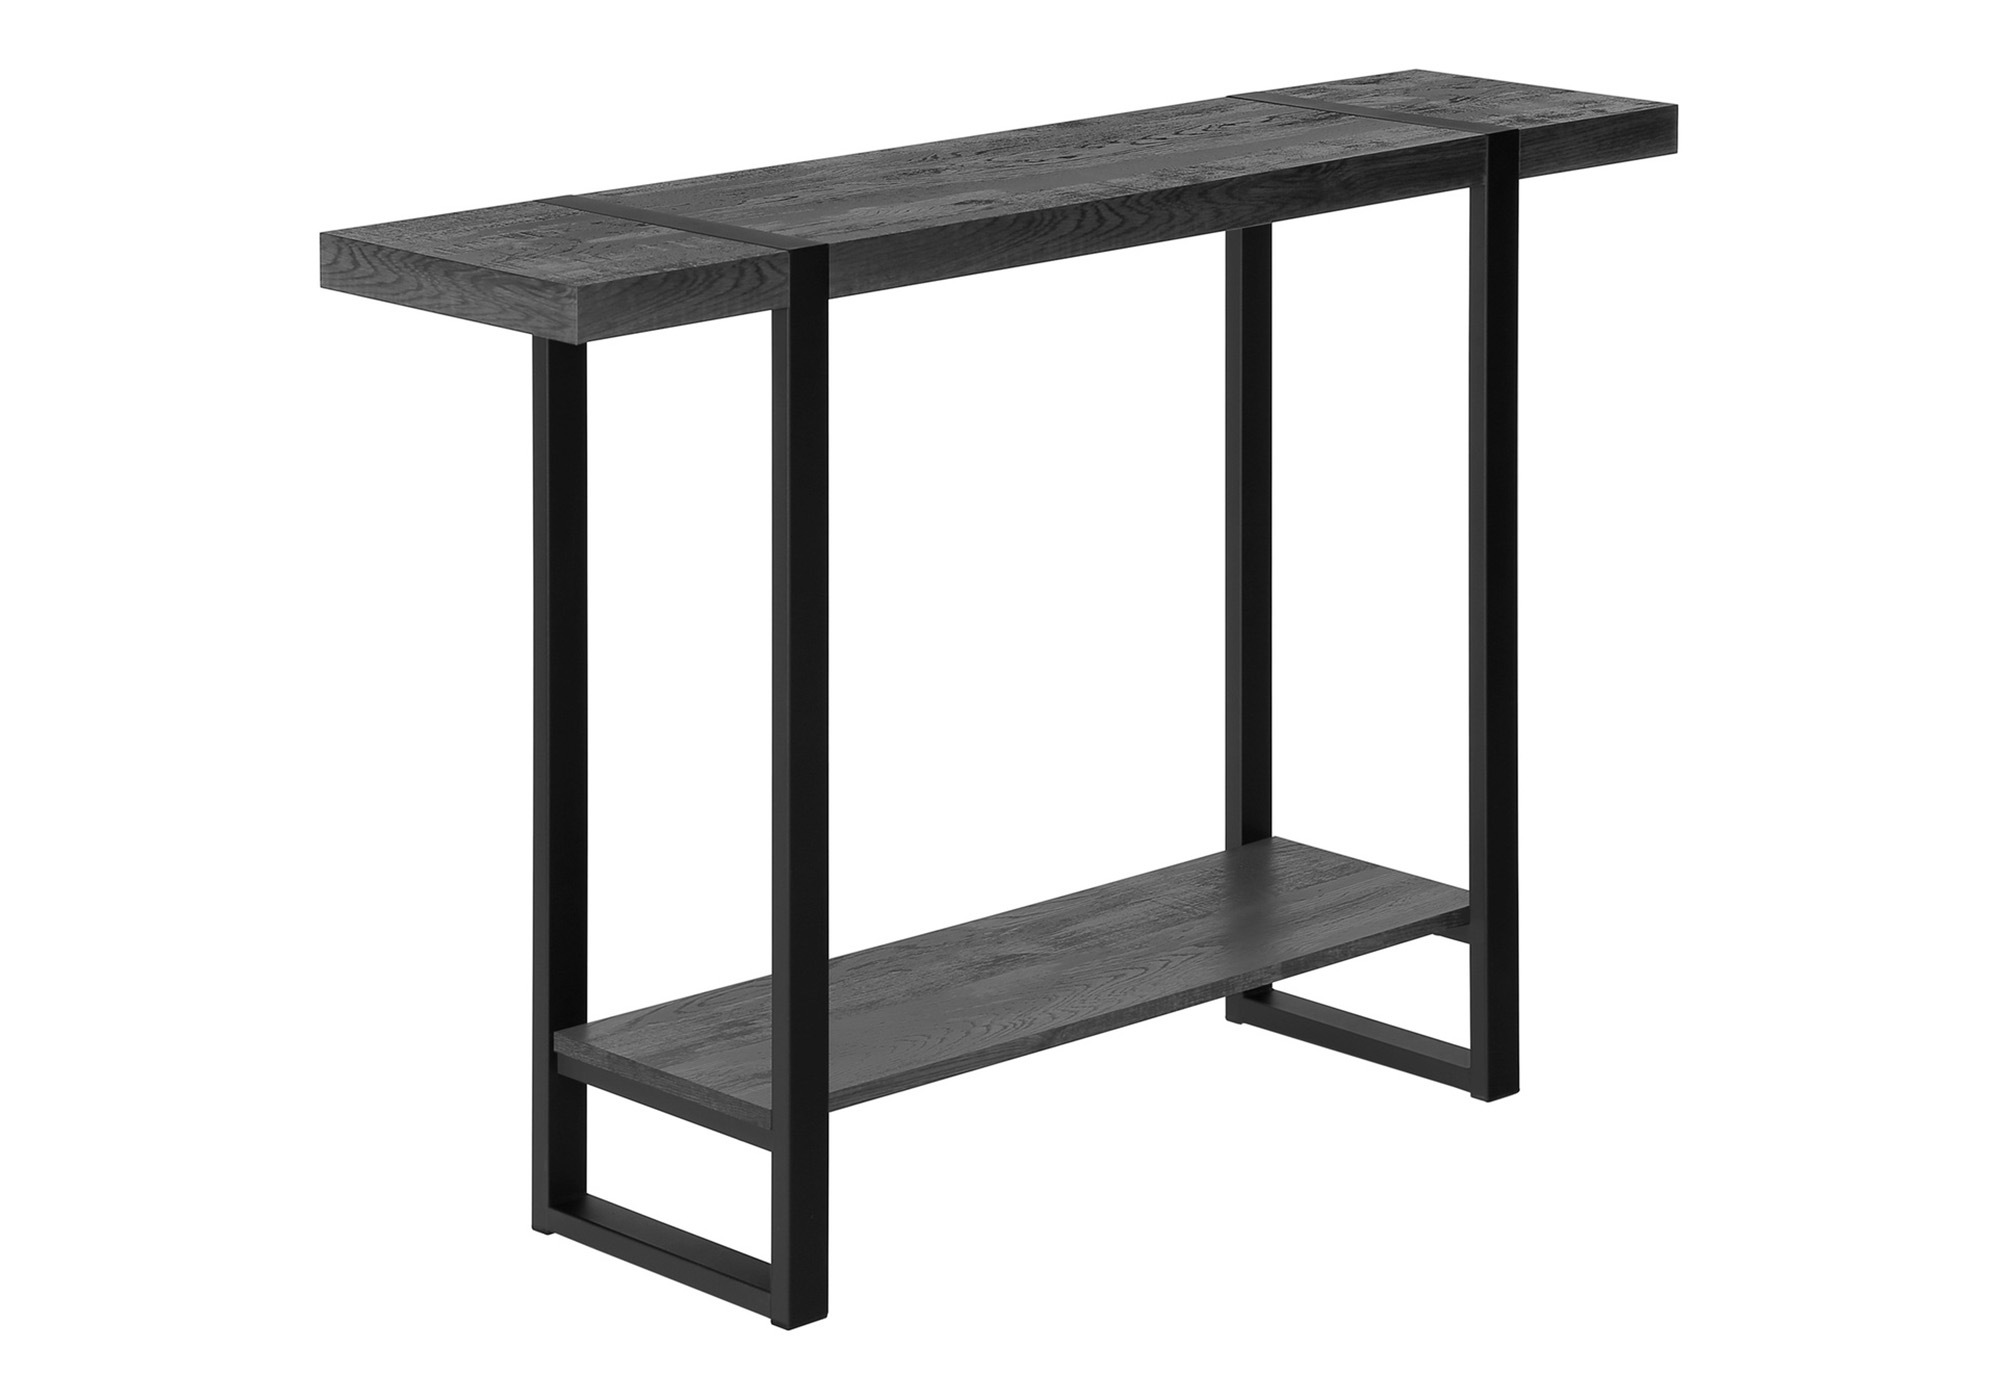 ACCENT TABLE - 48"L / BLACK RECLAIMED WOOD-LOOK / BLACK 